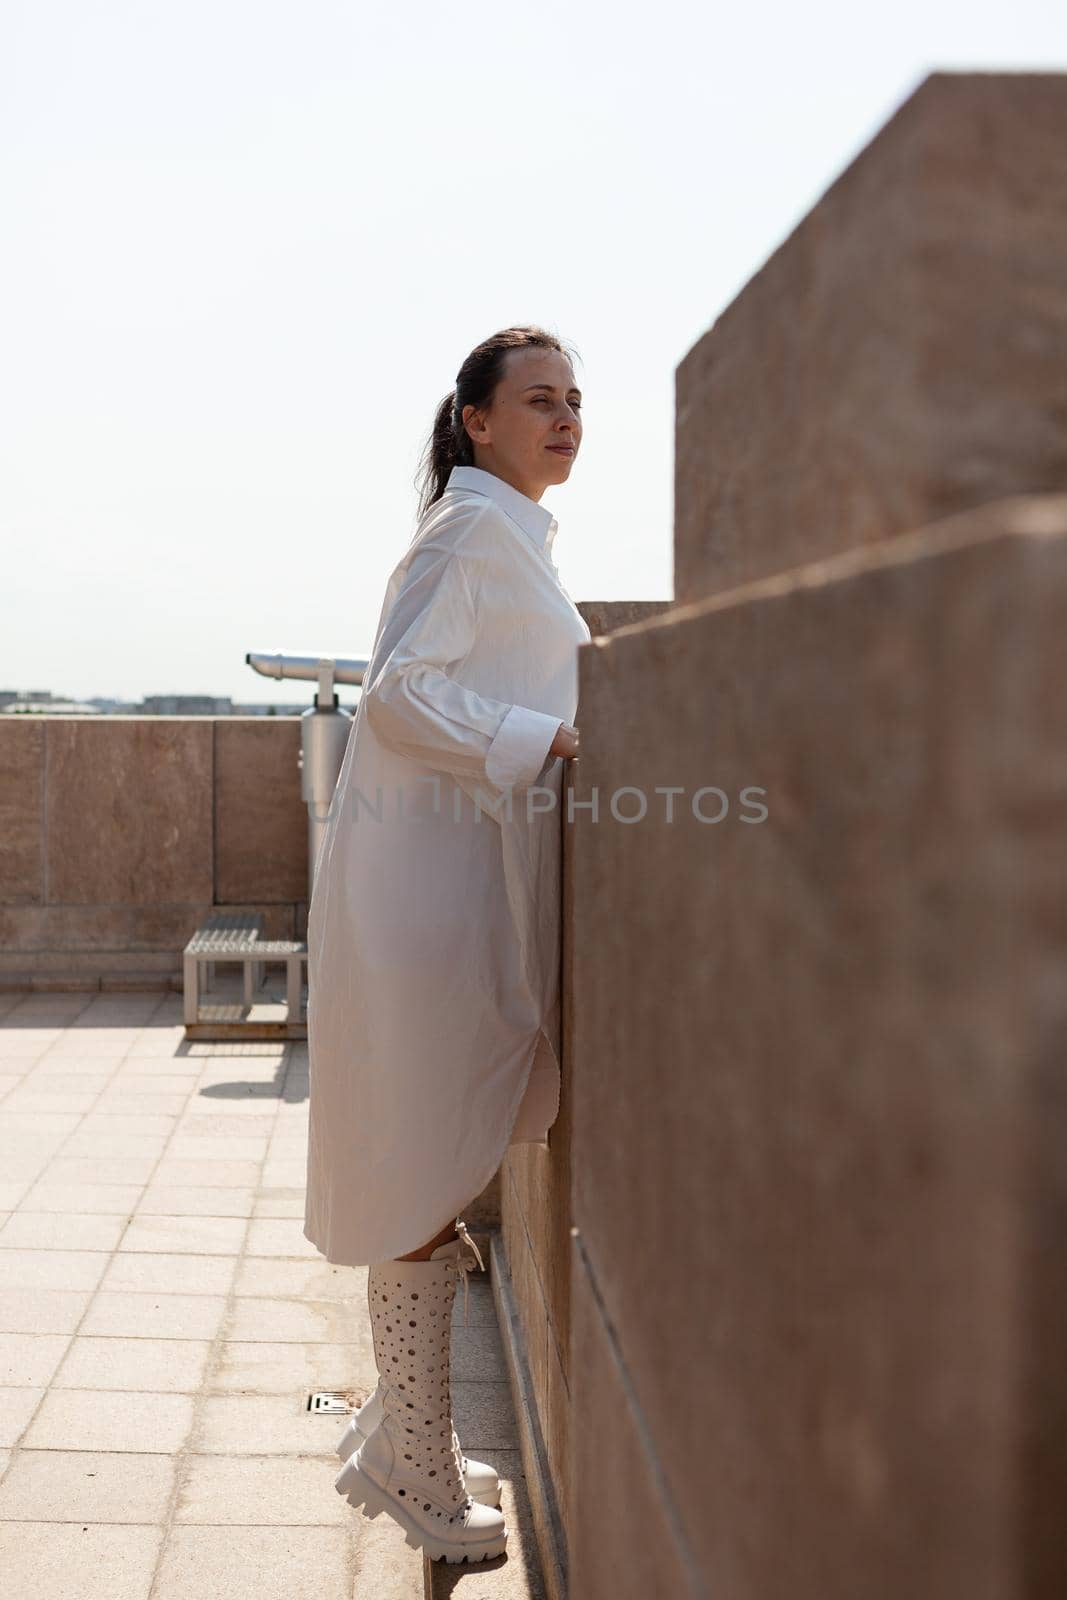 Caucasian female tourist standing on tower rooftop enjoying by DCStudio